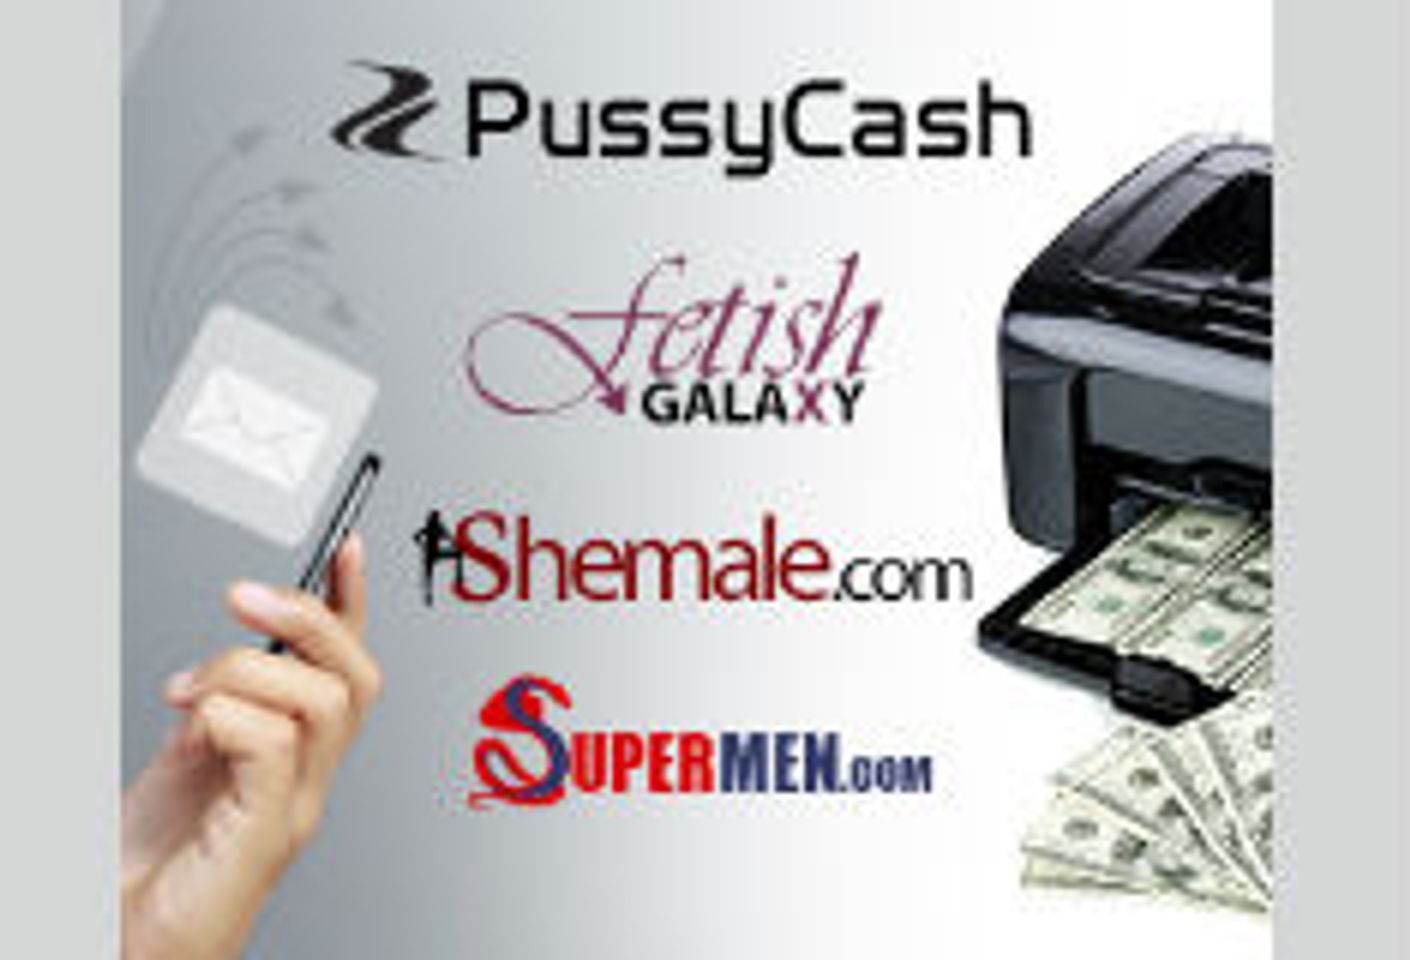 PussyCash Lifestyle Sites Offer New Pay-Per-Lead Payouts